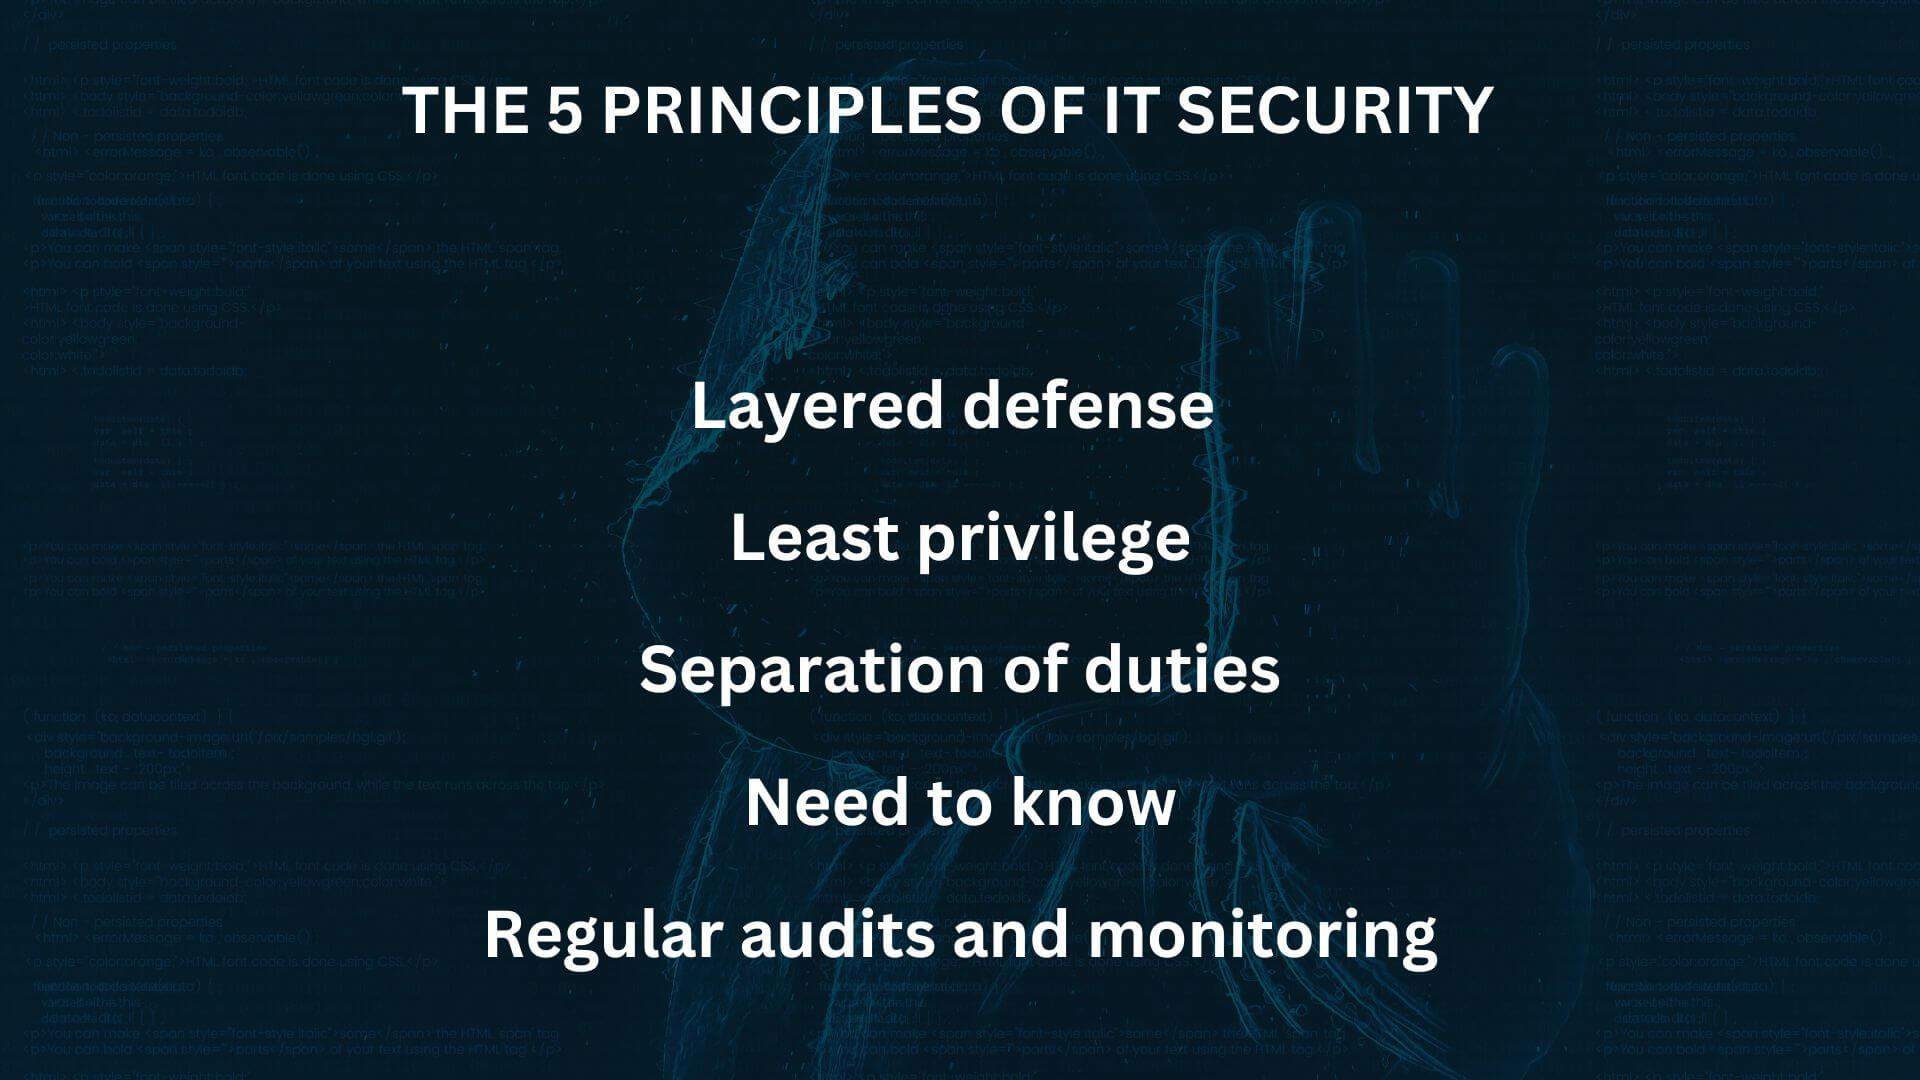 The 5 Principles of IT Security